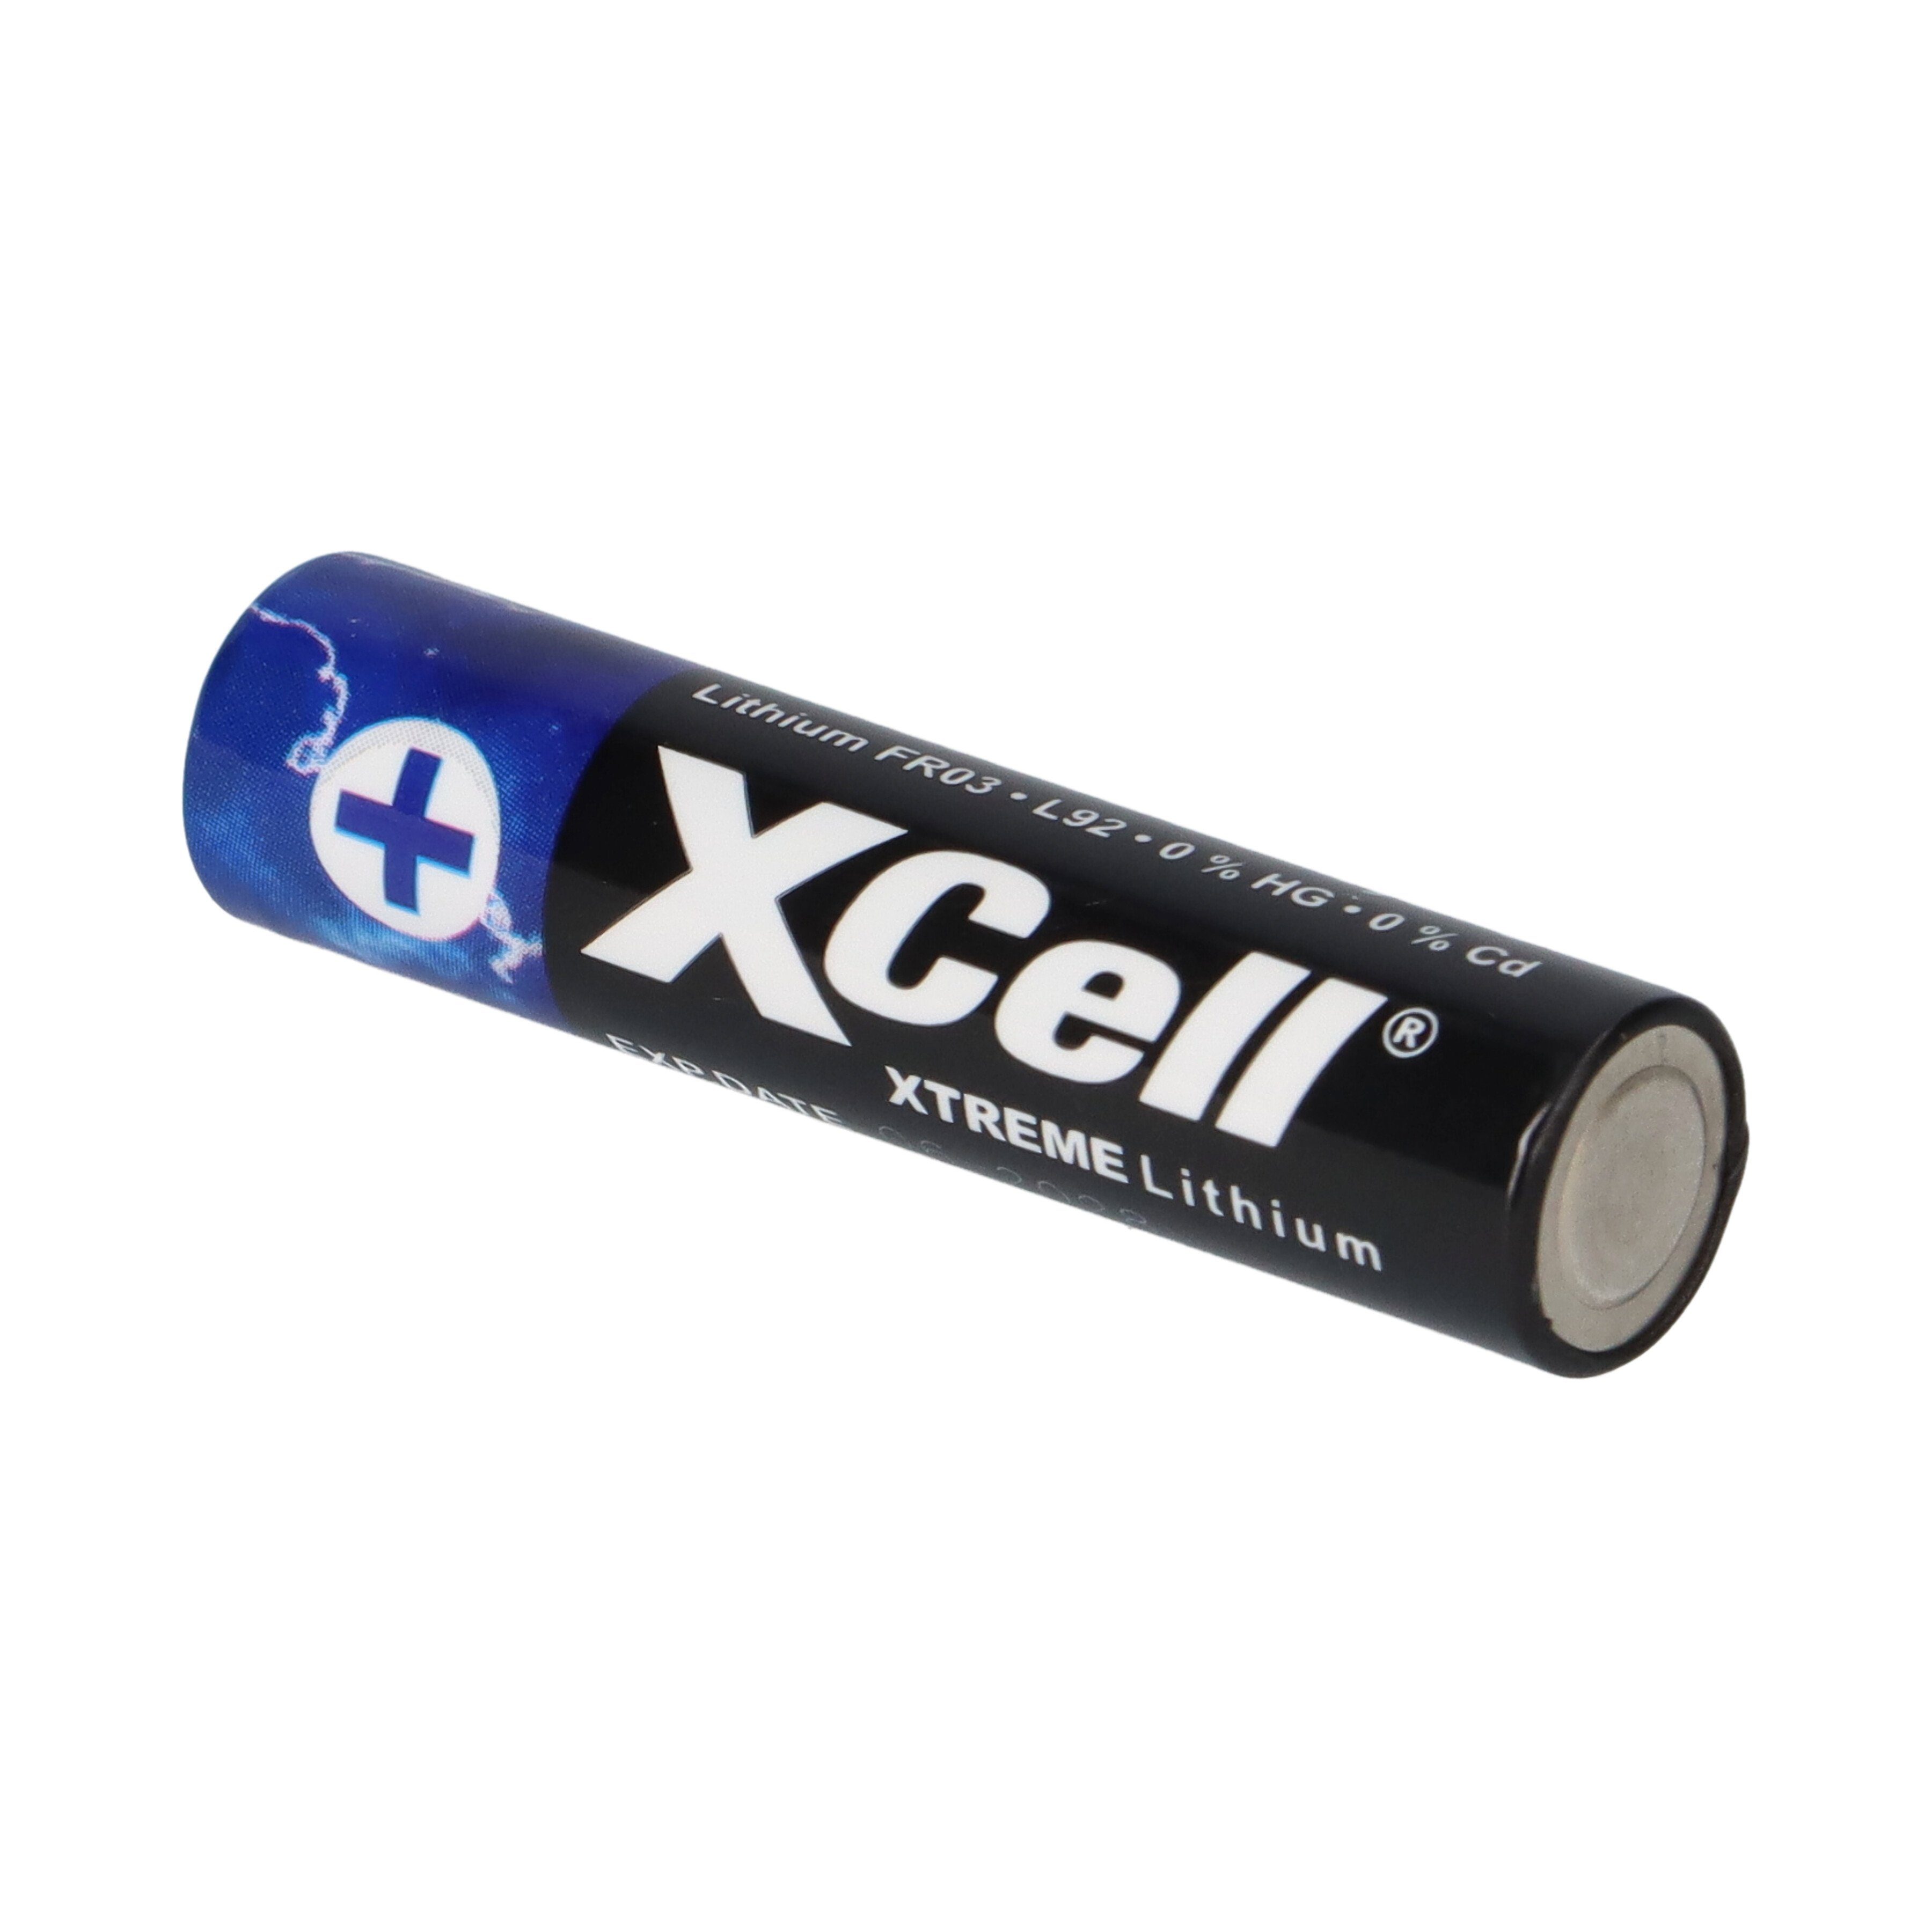 XTREME Lithium FR03 XCell Micro Batterie 4er Blister AAA Batterie L92 XCell